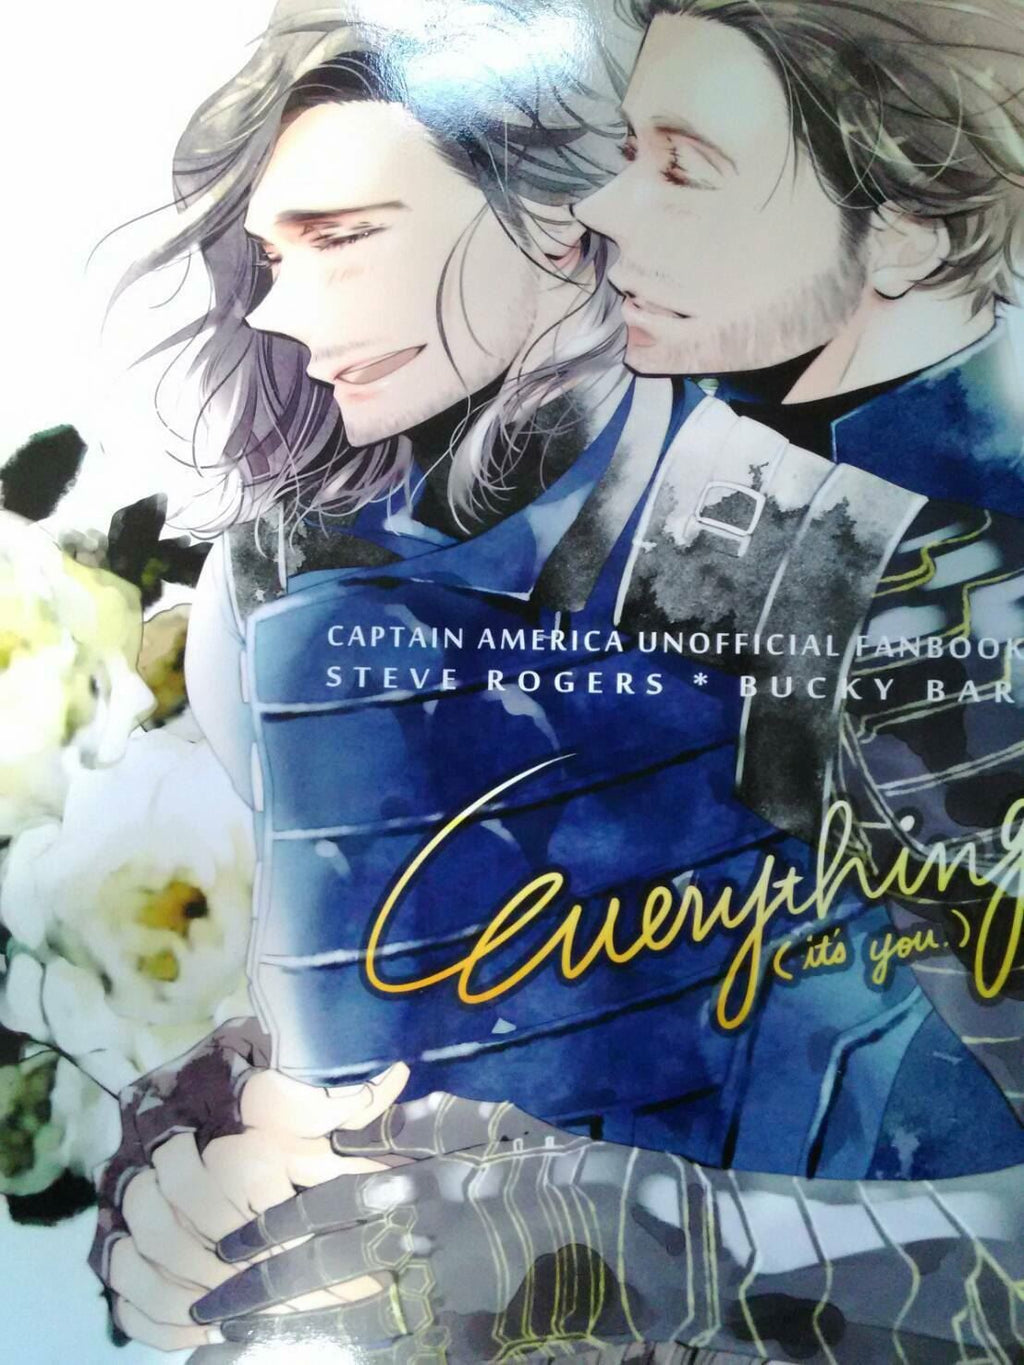 Doujinshi Captain America Steve / Bucky (B5 28pages) TENNEN Everything it's